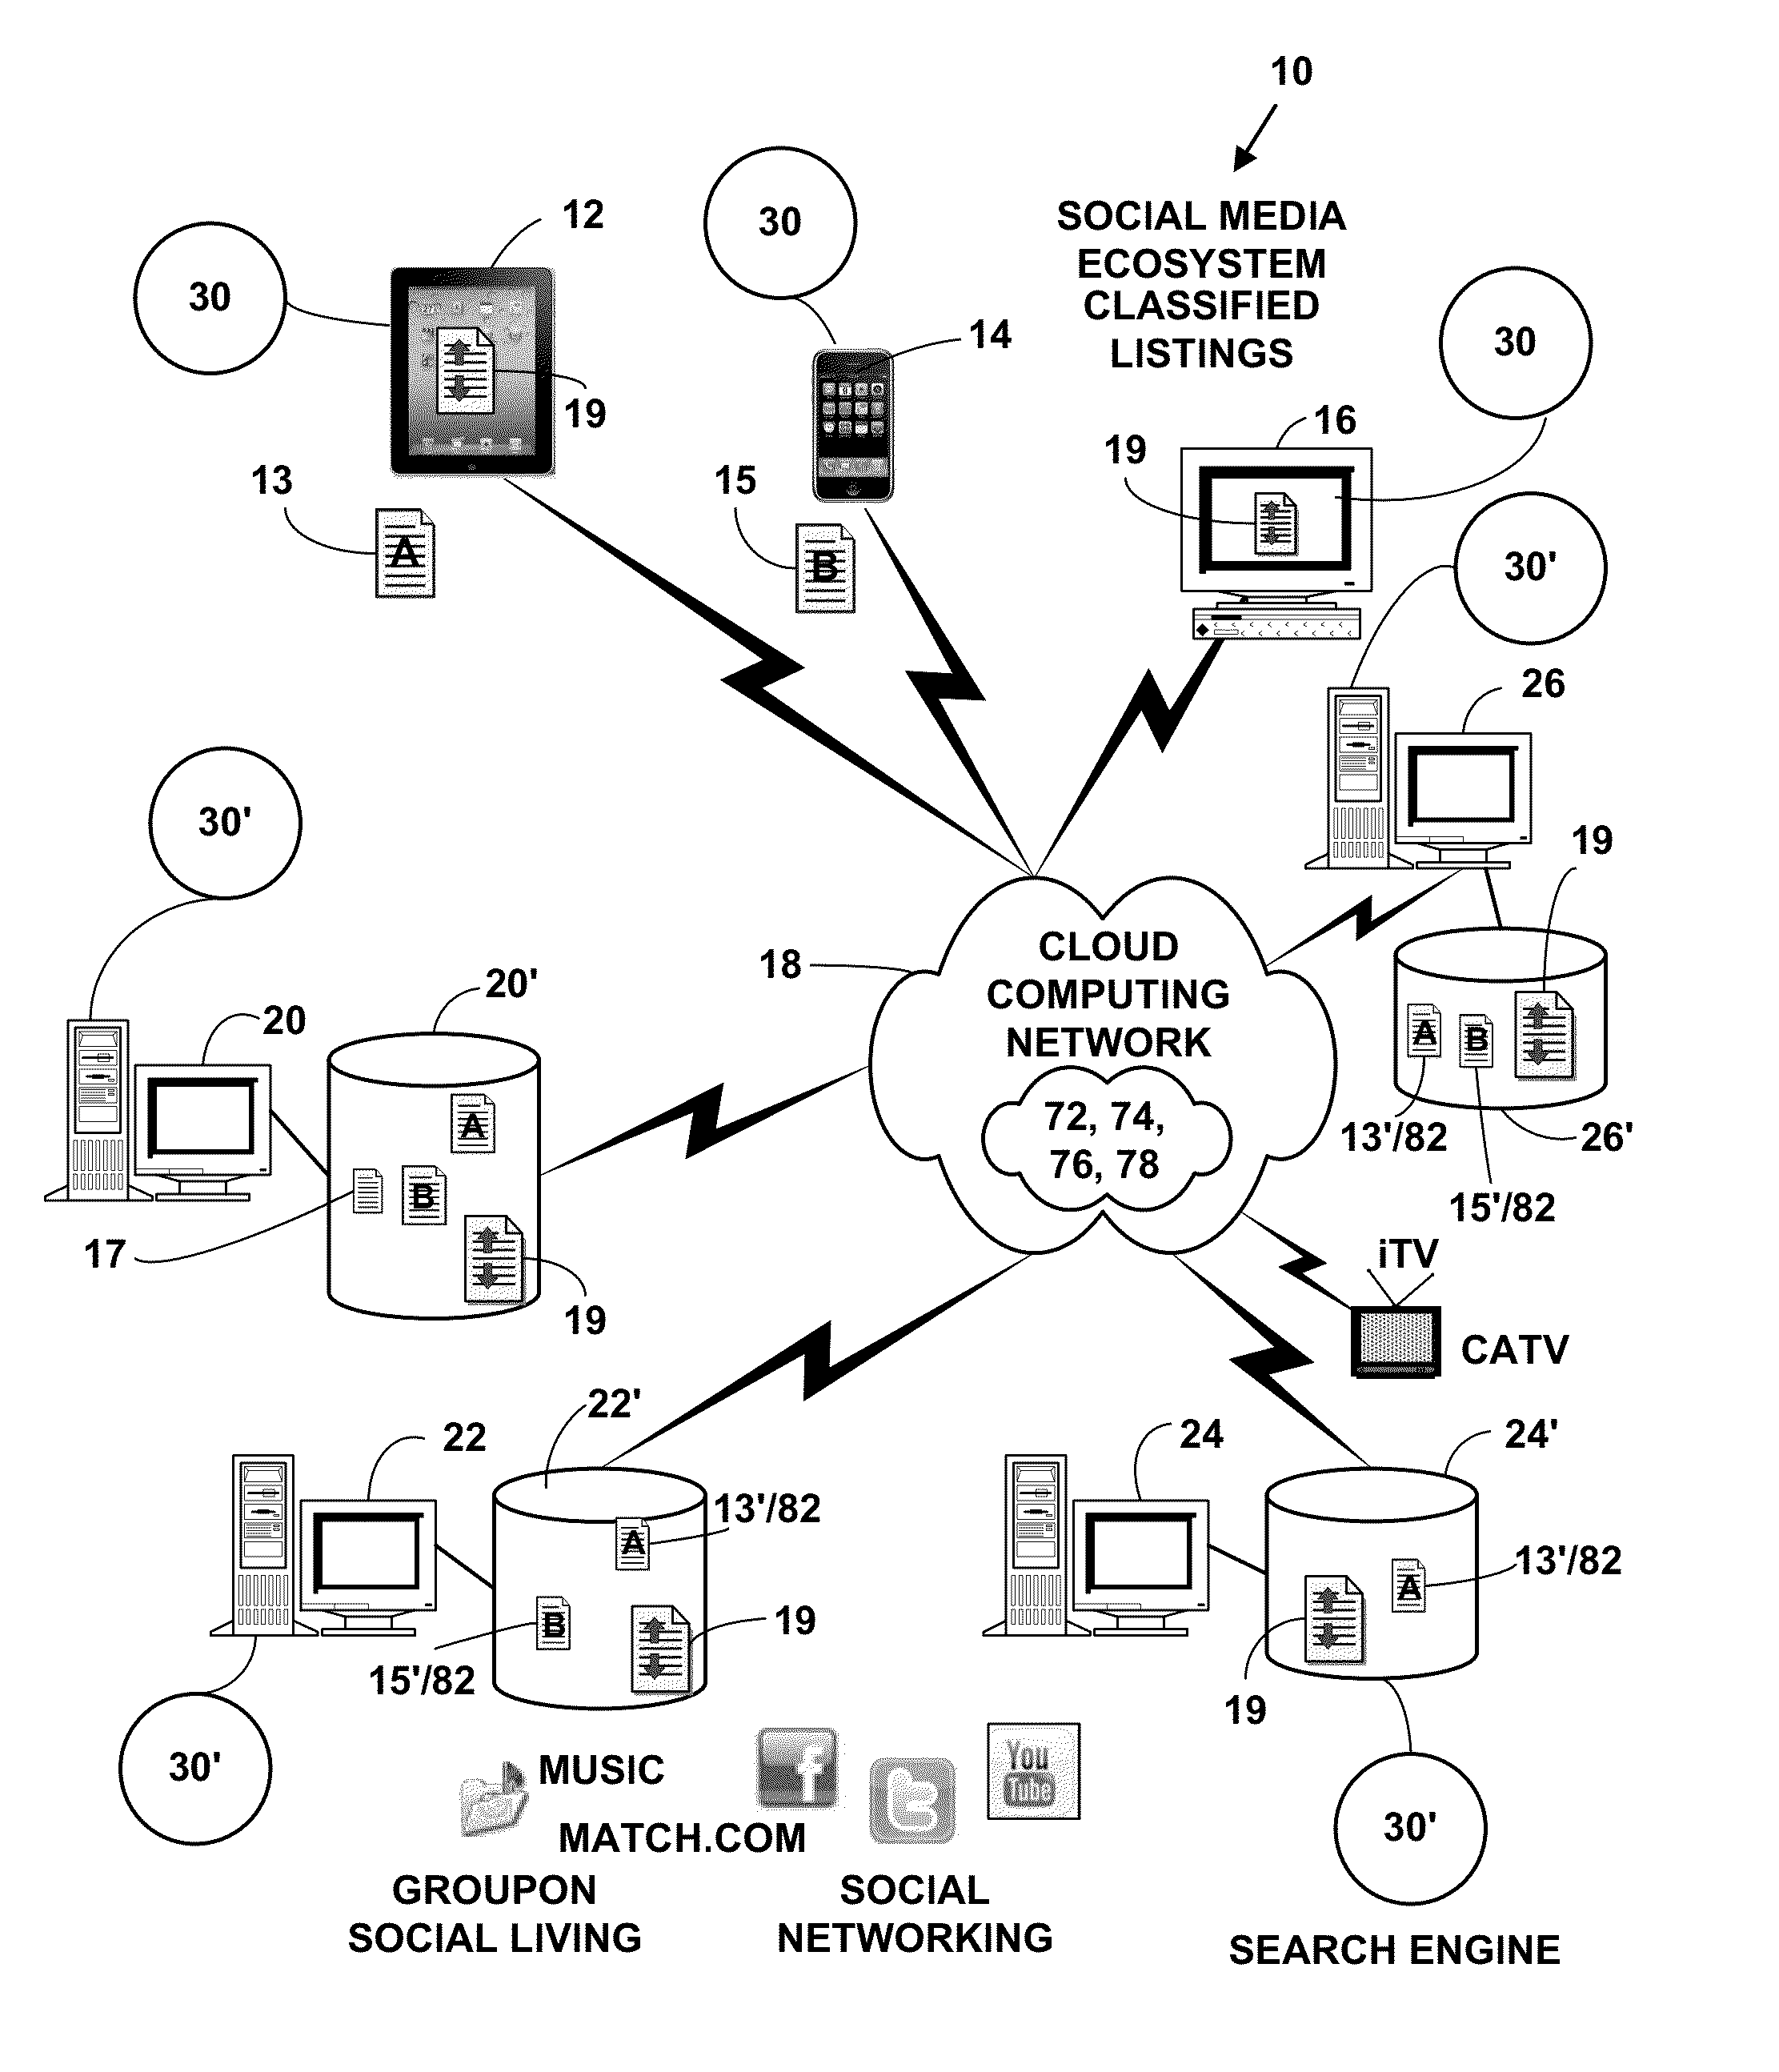 Method and system for providing social media ecosystem classified listings